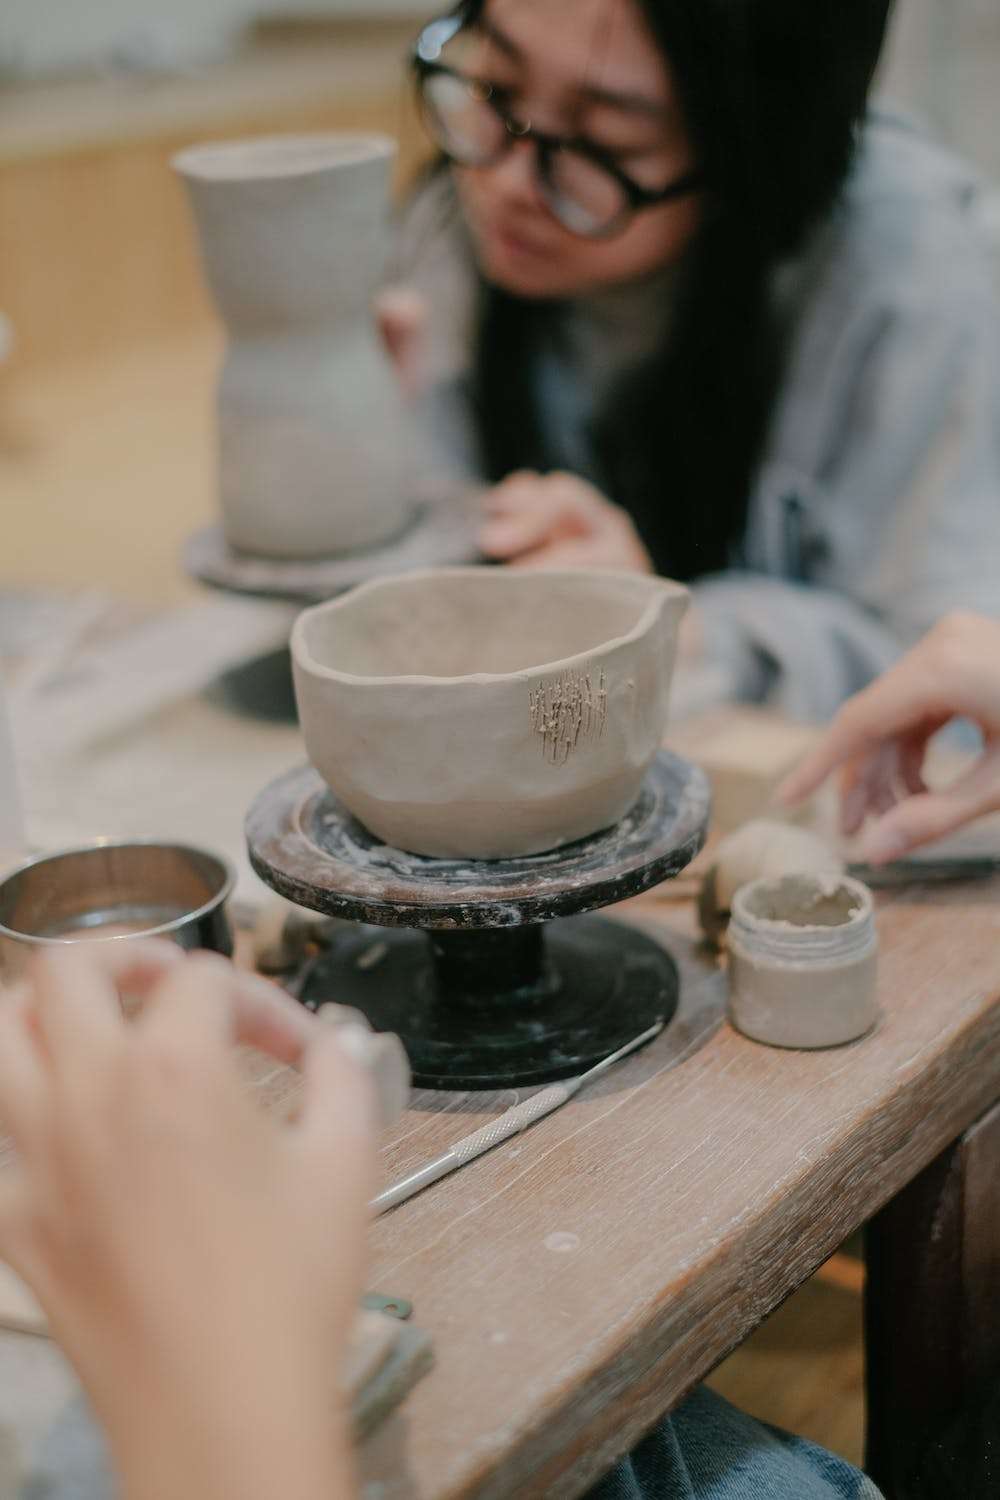 Try something new to improve your mental health photo of woman making pottery